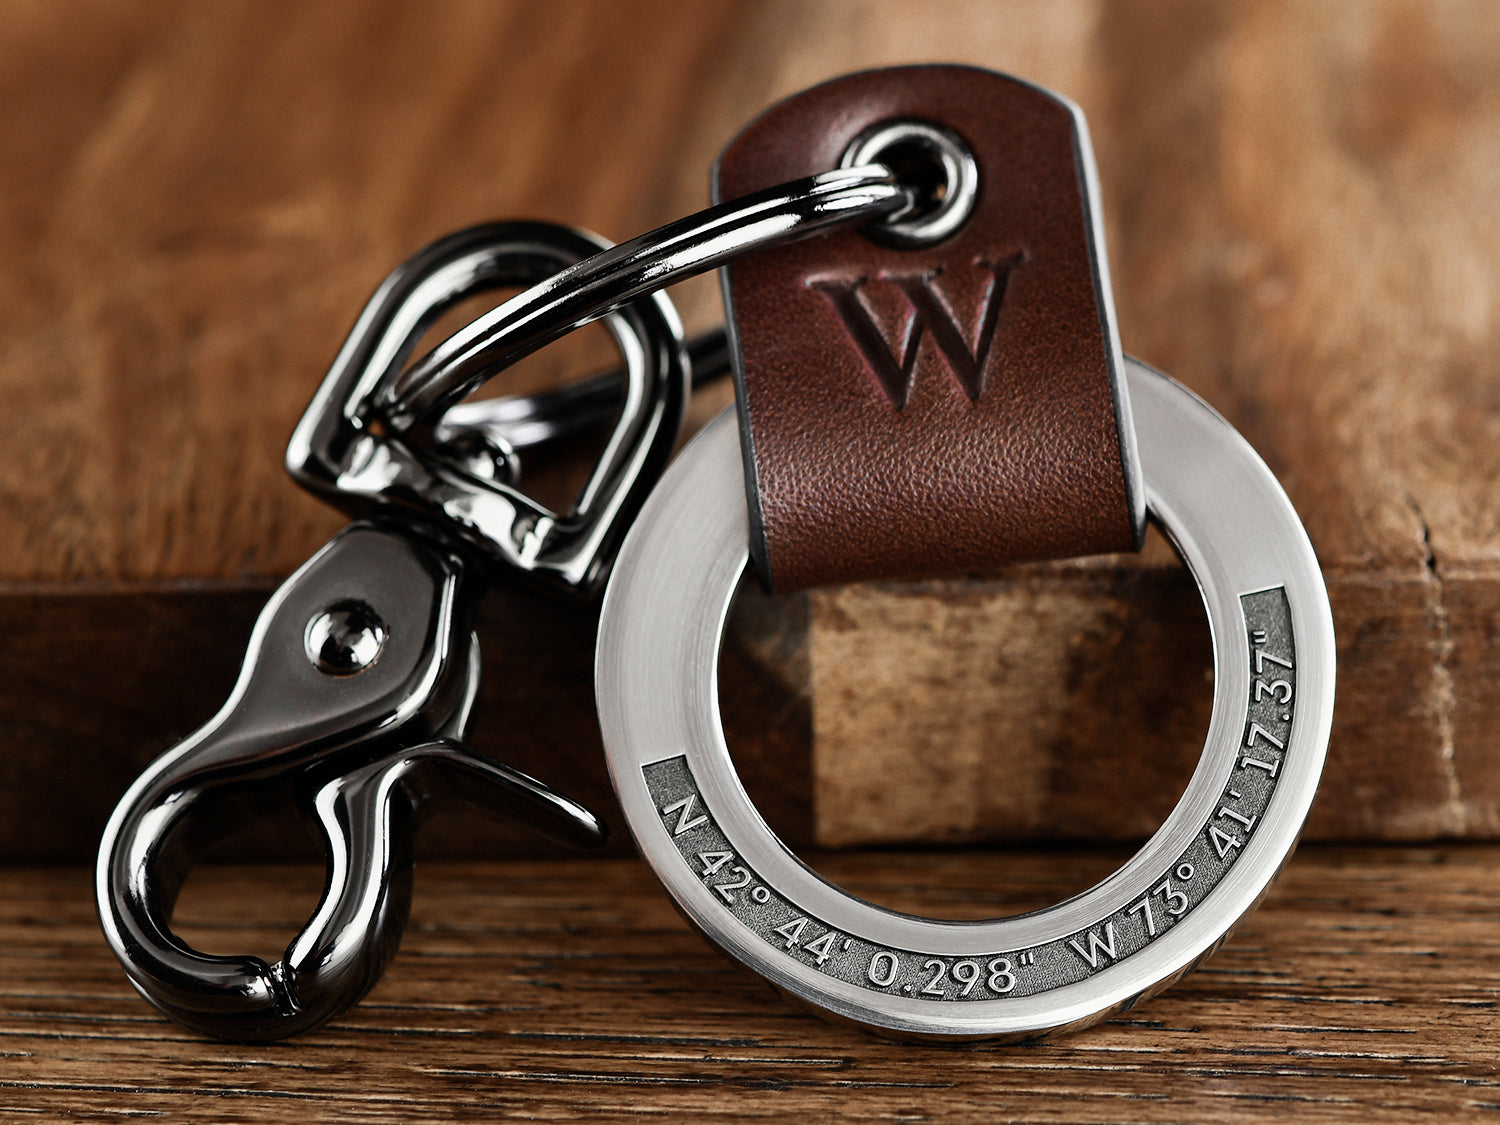 LEATHER KEYRING - THE ONE RING